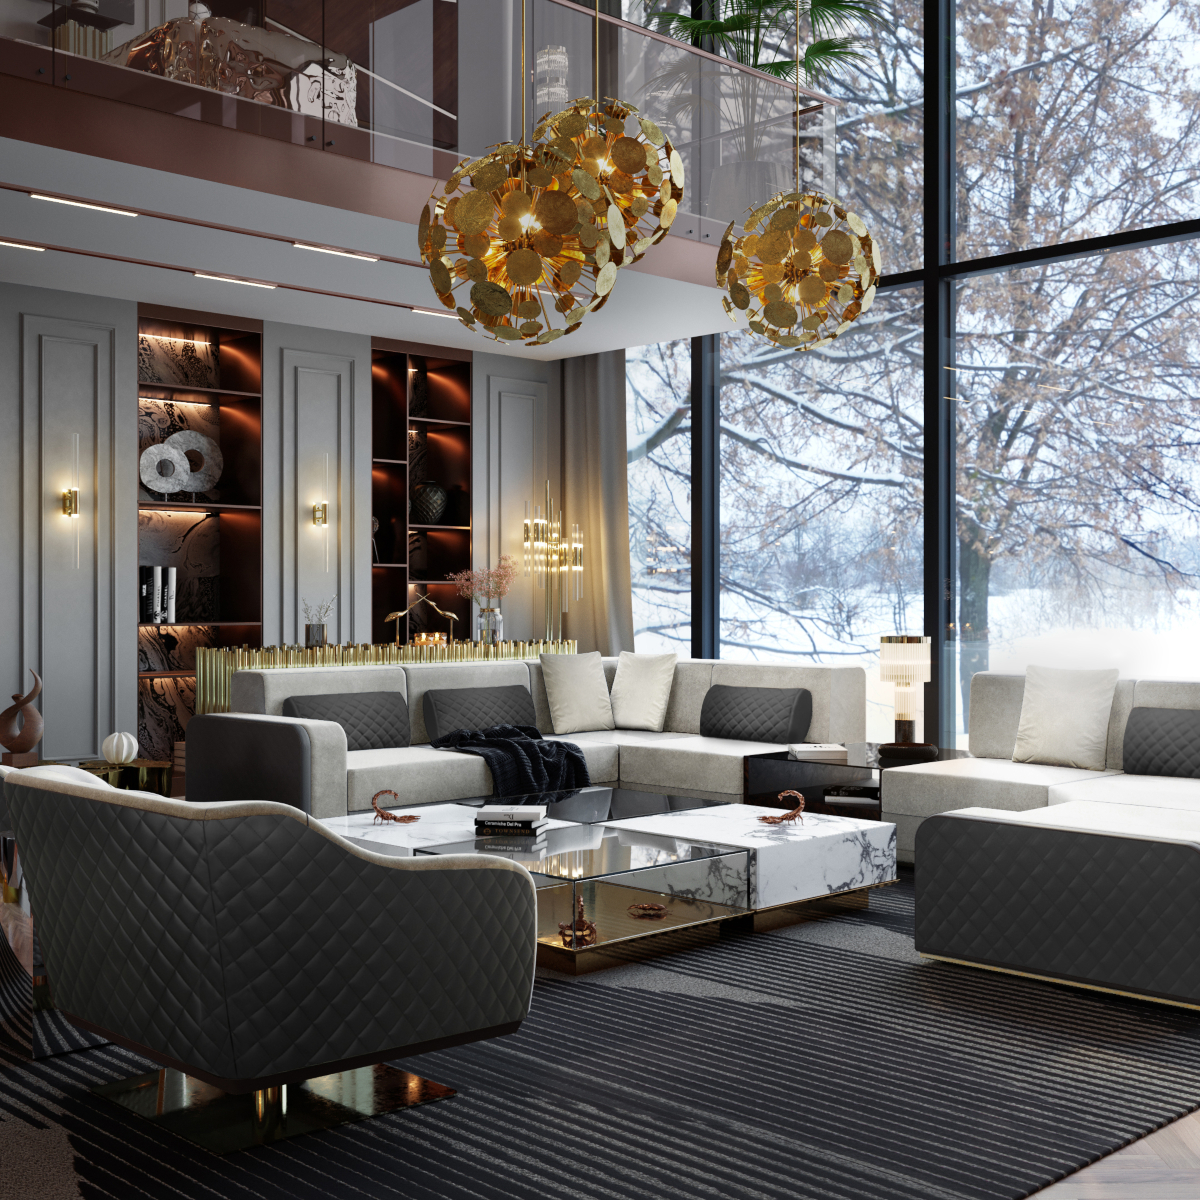 Covet Villa Moscow: A Millionaire Russian Home